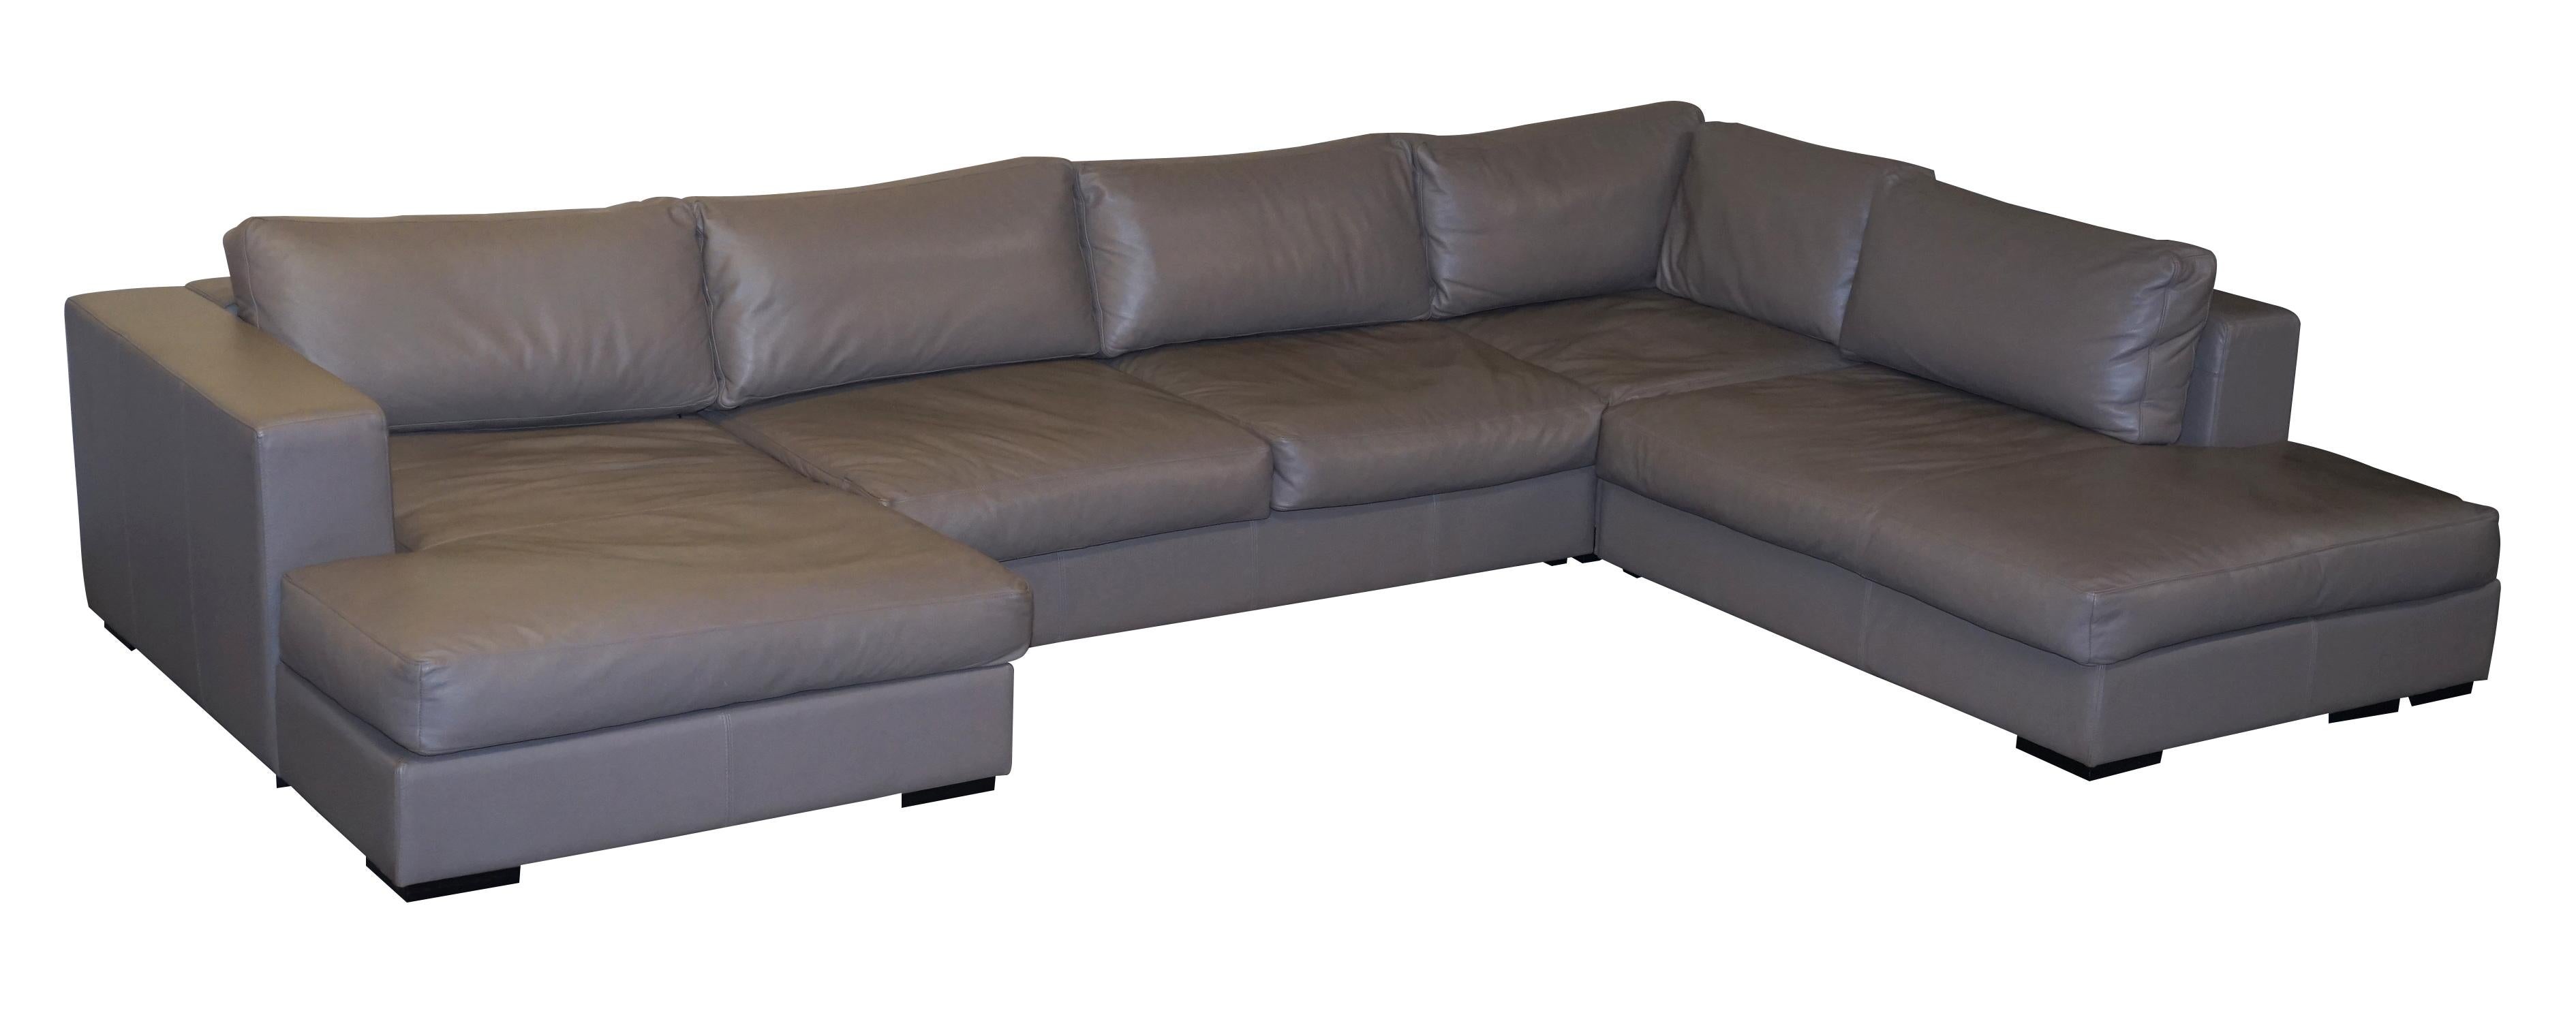 We are delighted to offer for sale this stunning Bo Concepts Cenova 5-6 person sofa chaise RRP £18,000

A very well made piece that offers huge amounts of seating space, this sofa retails for £18,000 with this set up, its modular and comes in